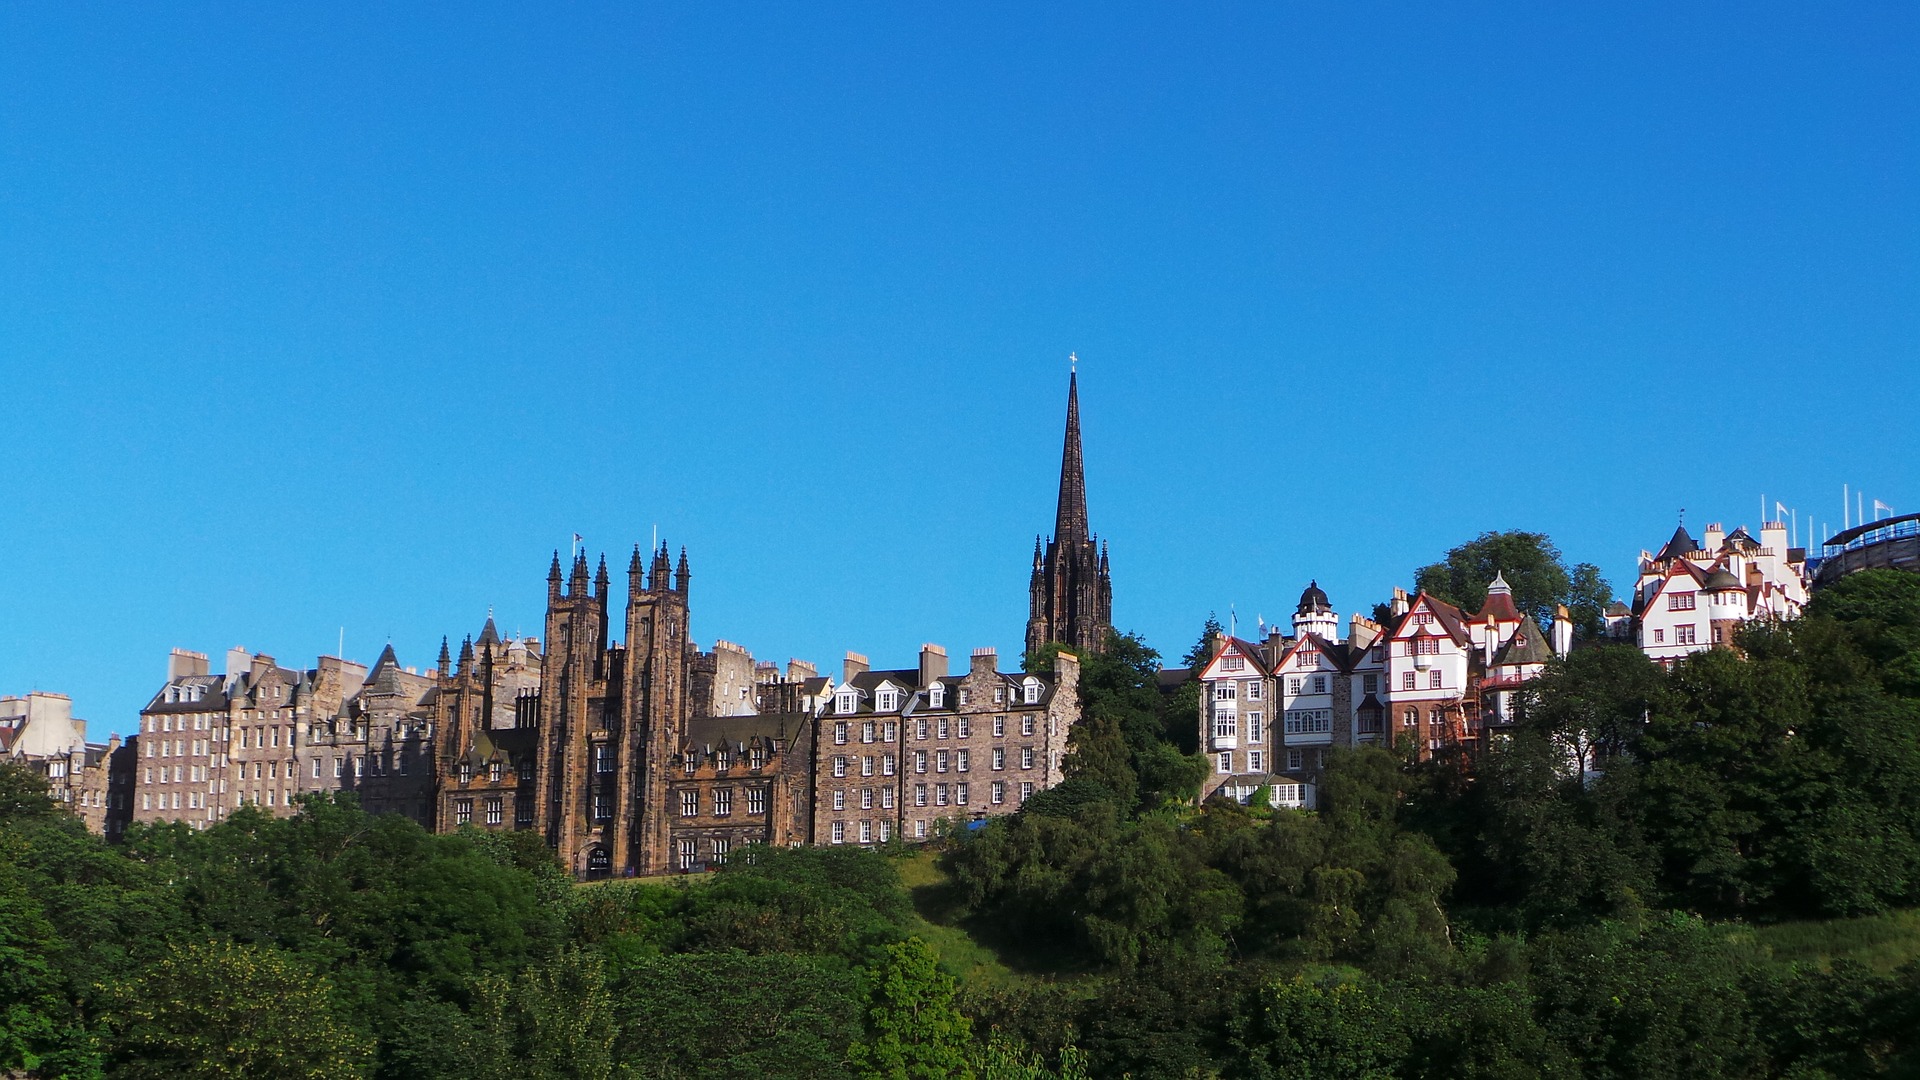 Sustainable city ambitions recognised in new Edinburgh by Numbers report